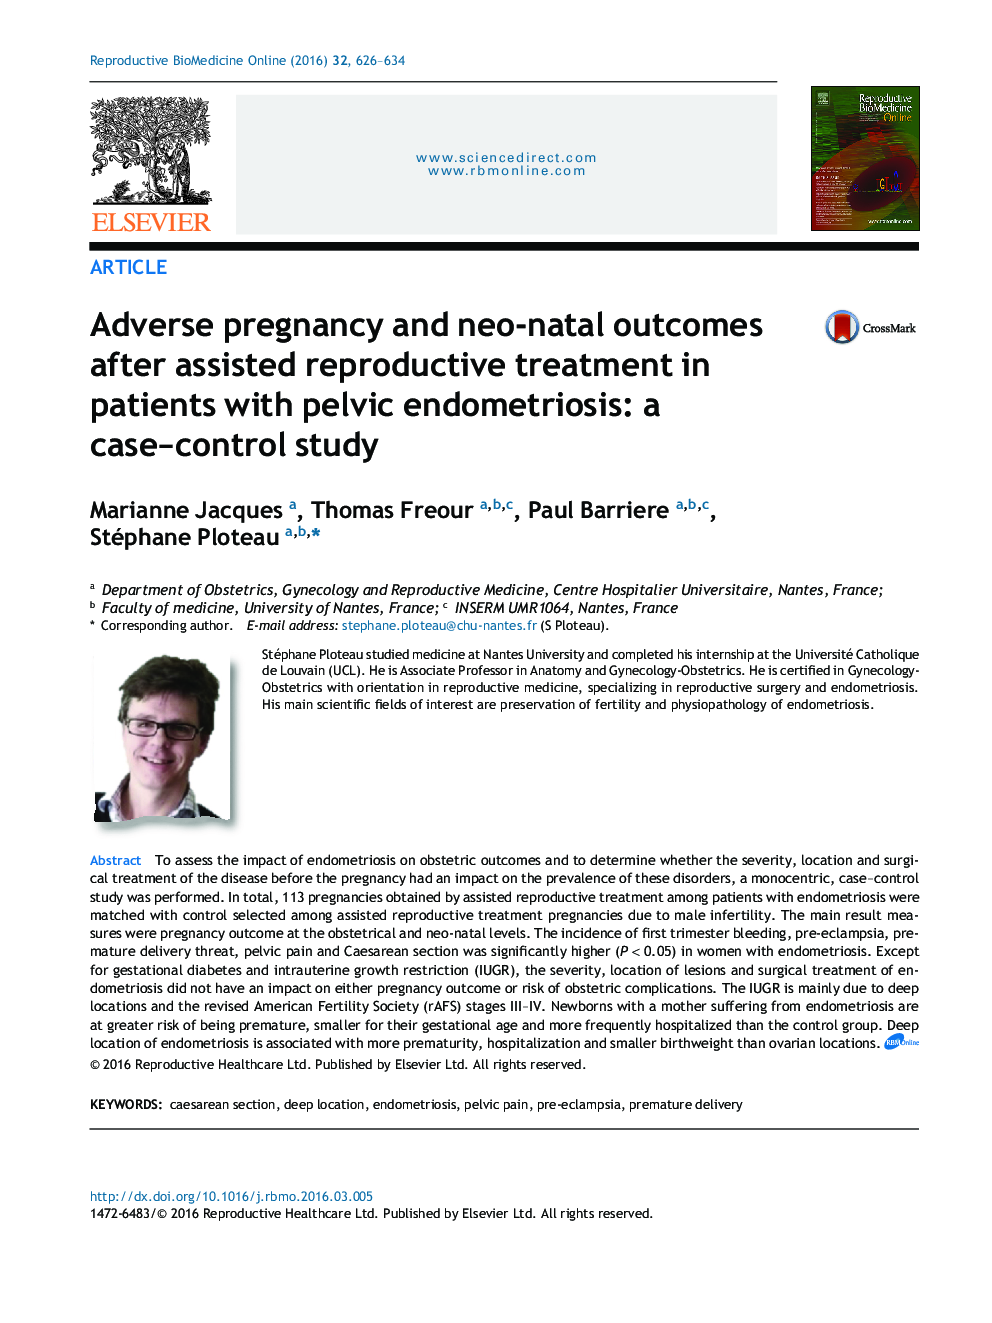 Adverse pregnancy and neo-natal outcomes after assisted reproductive treatment in patients with pelvic endometriosis: a case–control study